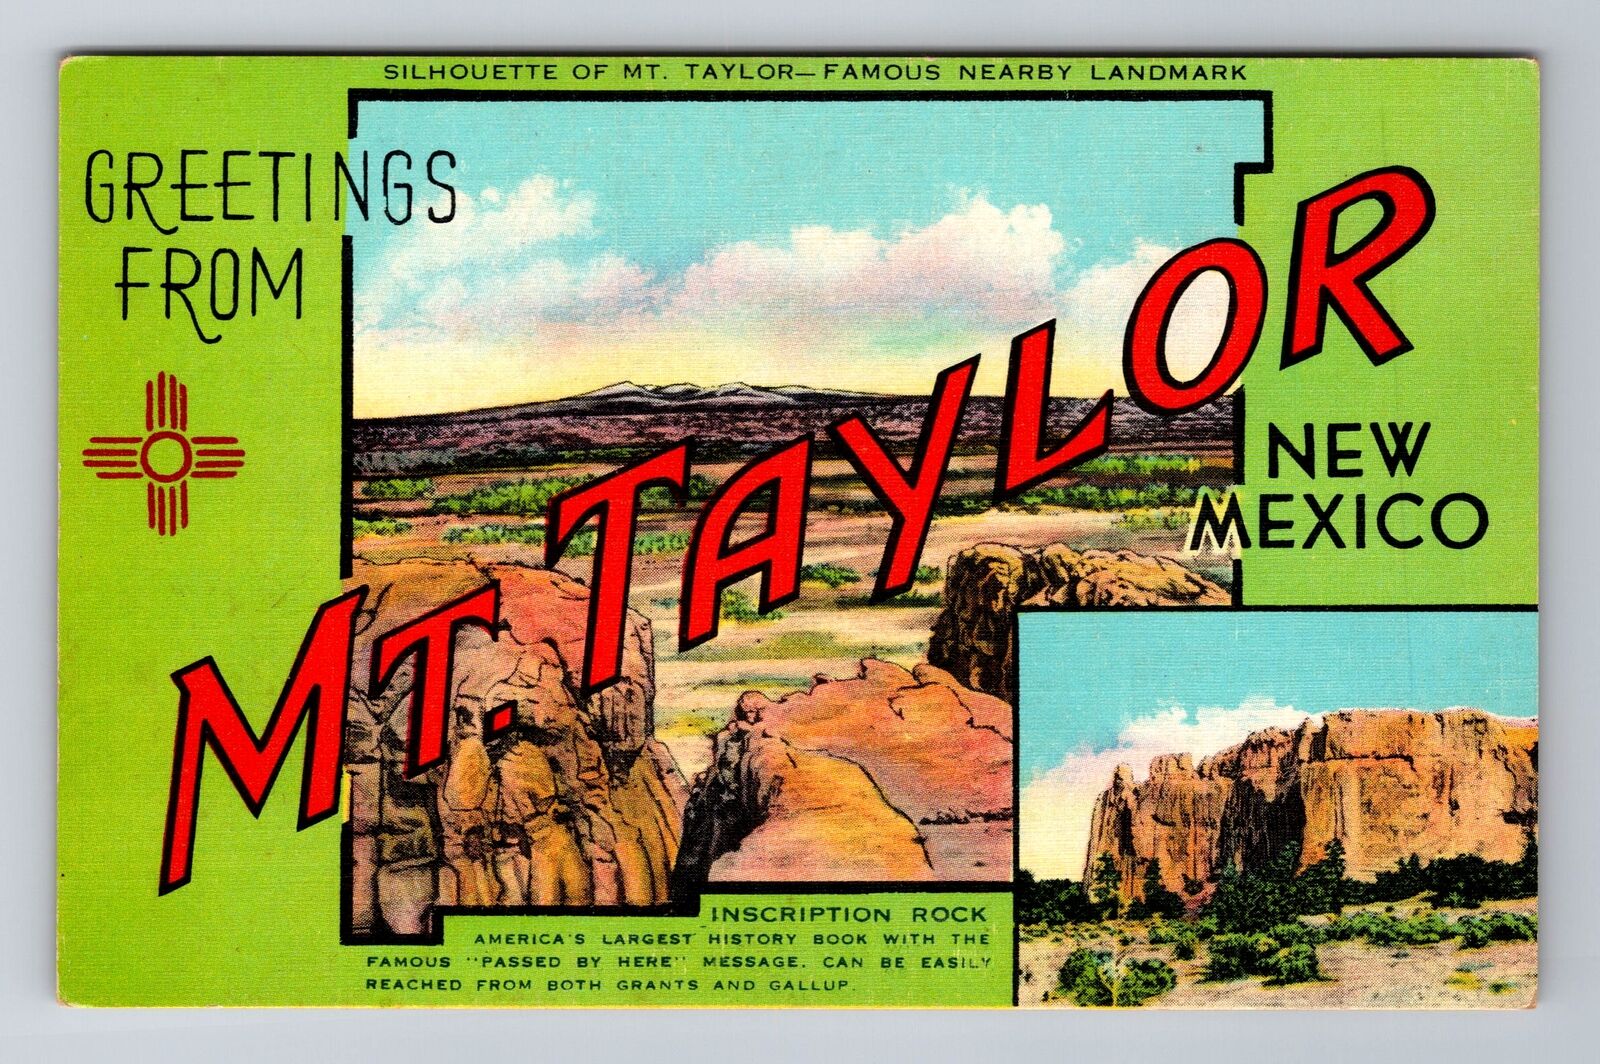 Mt. Taylor NM-New Mexico, General Greetings, Tourist Sites, Vintage Postcard